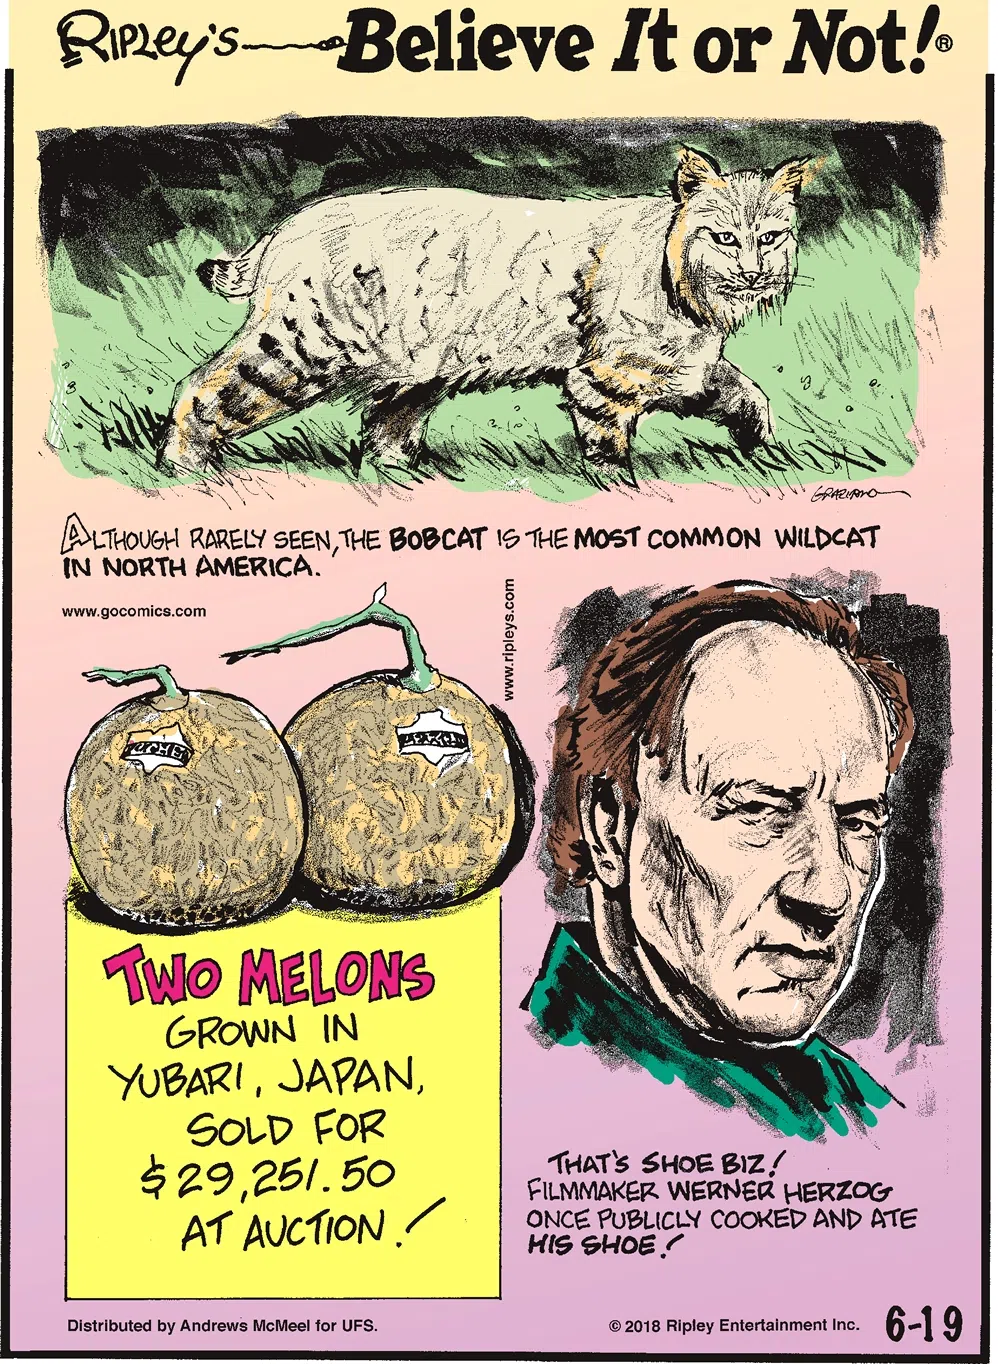 Although rarely seen, the bobcat is the most common wildcat in North America.-------------------- Two melons grown in Yubari, Japan, sold for $29,251.50 at auction!-------------------- That's shoe biz! Filmmaker Werner Herzog once publicly cooked and ate his shoe!